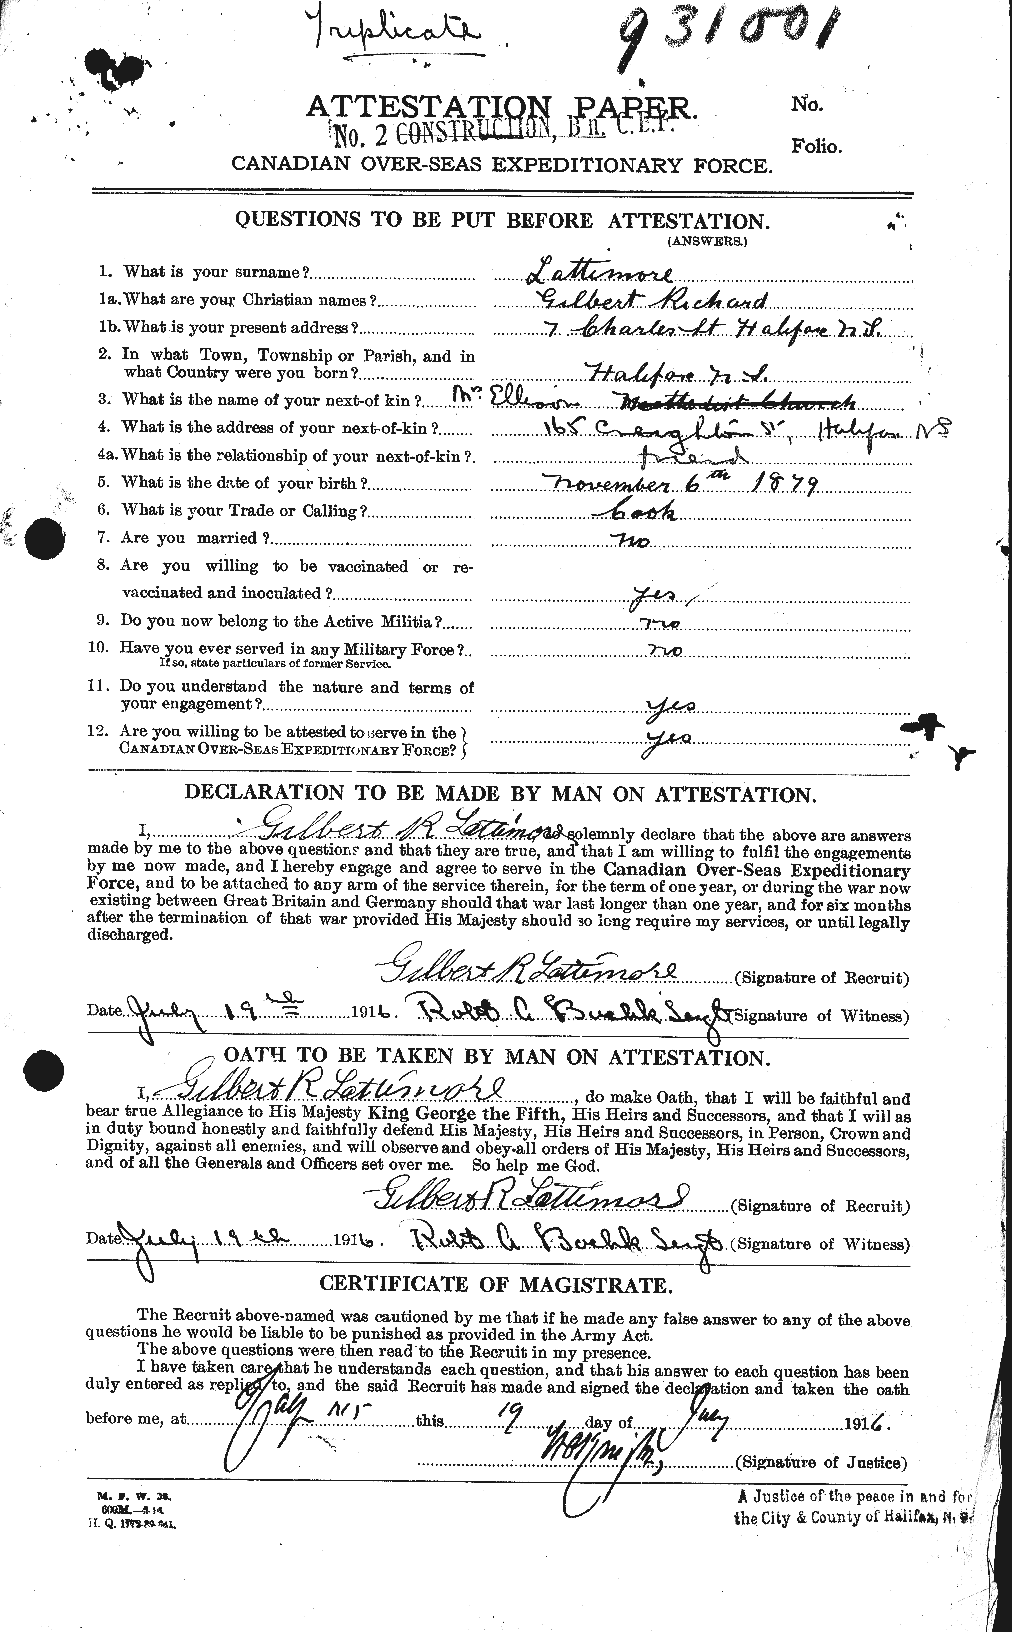 Personnel Records of the First World War - CEF 455373a